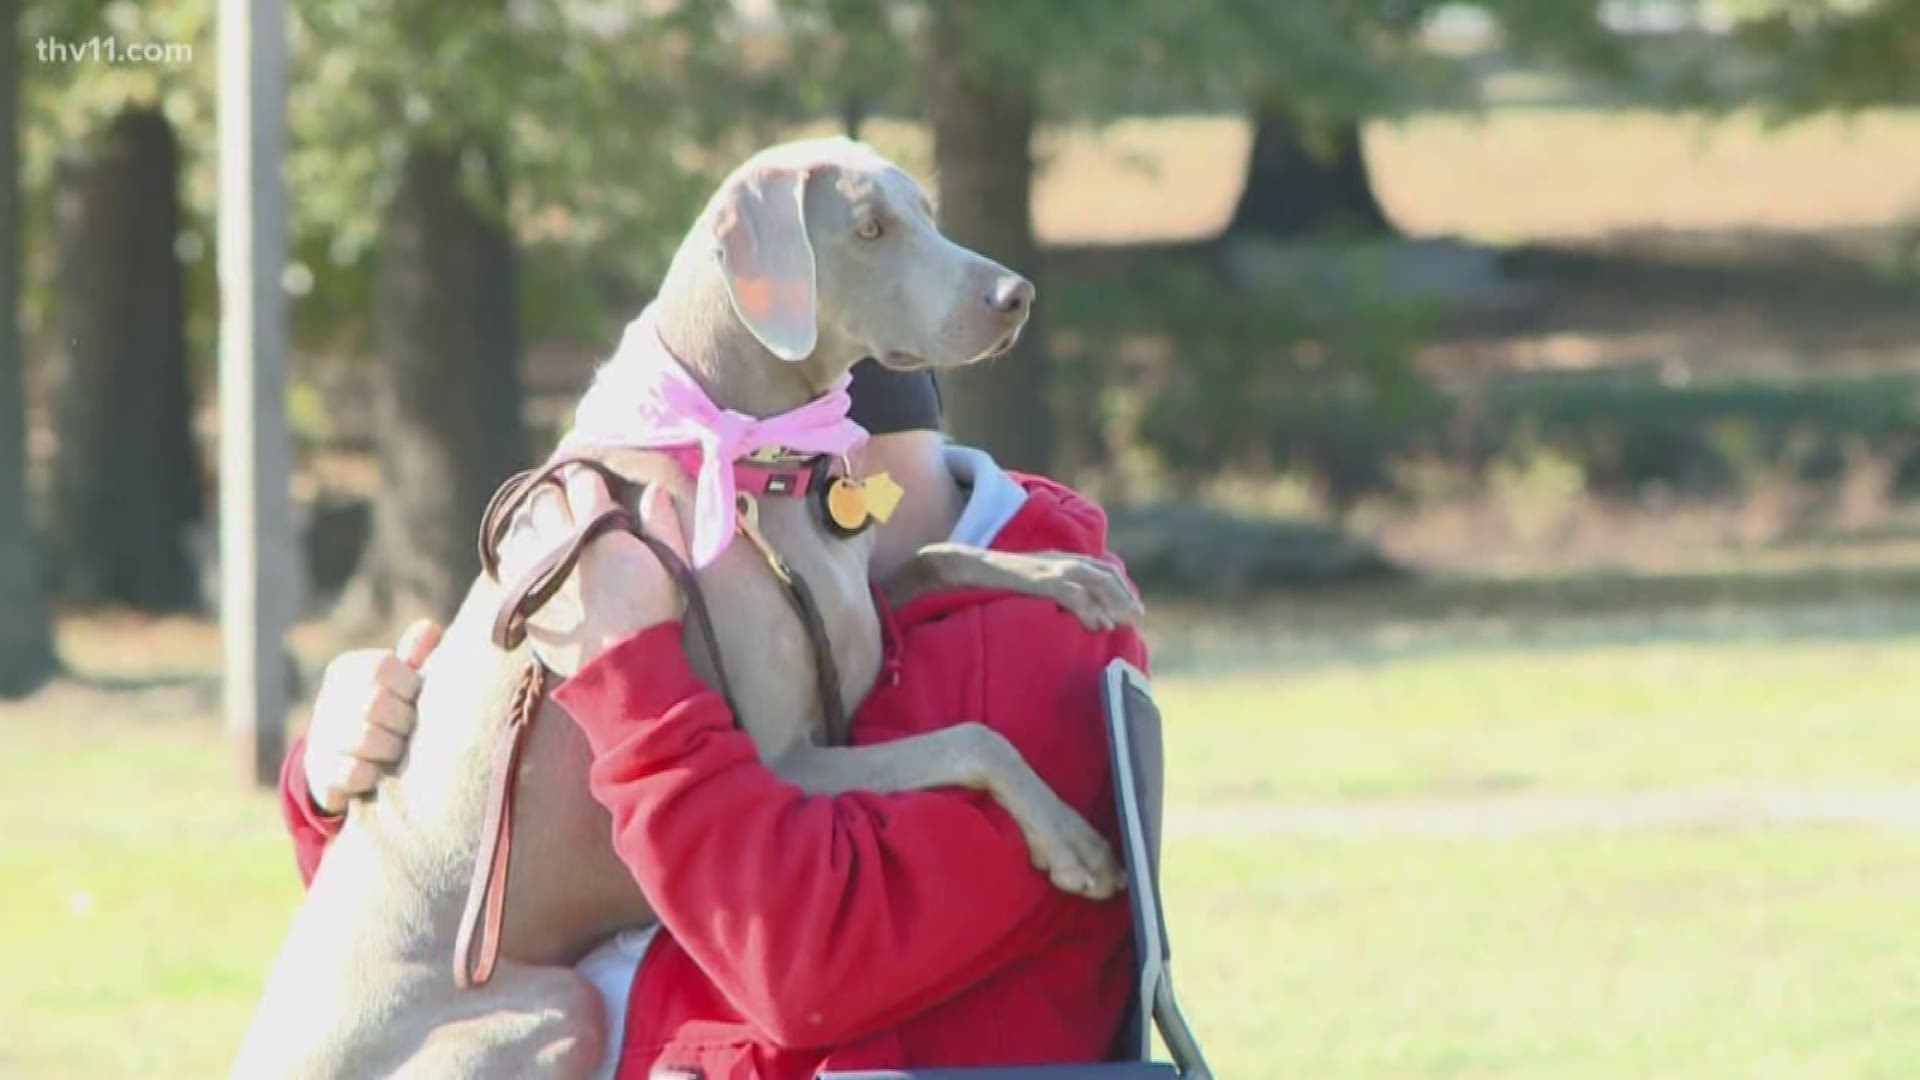 Dozens of people and their dogs walked around MacArthur Park today to raise awareness about cancer.